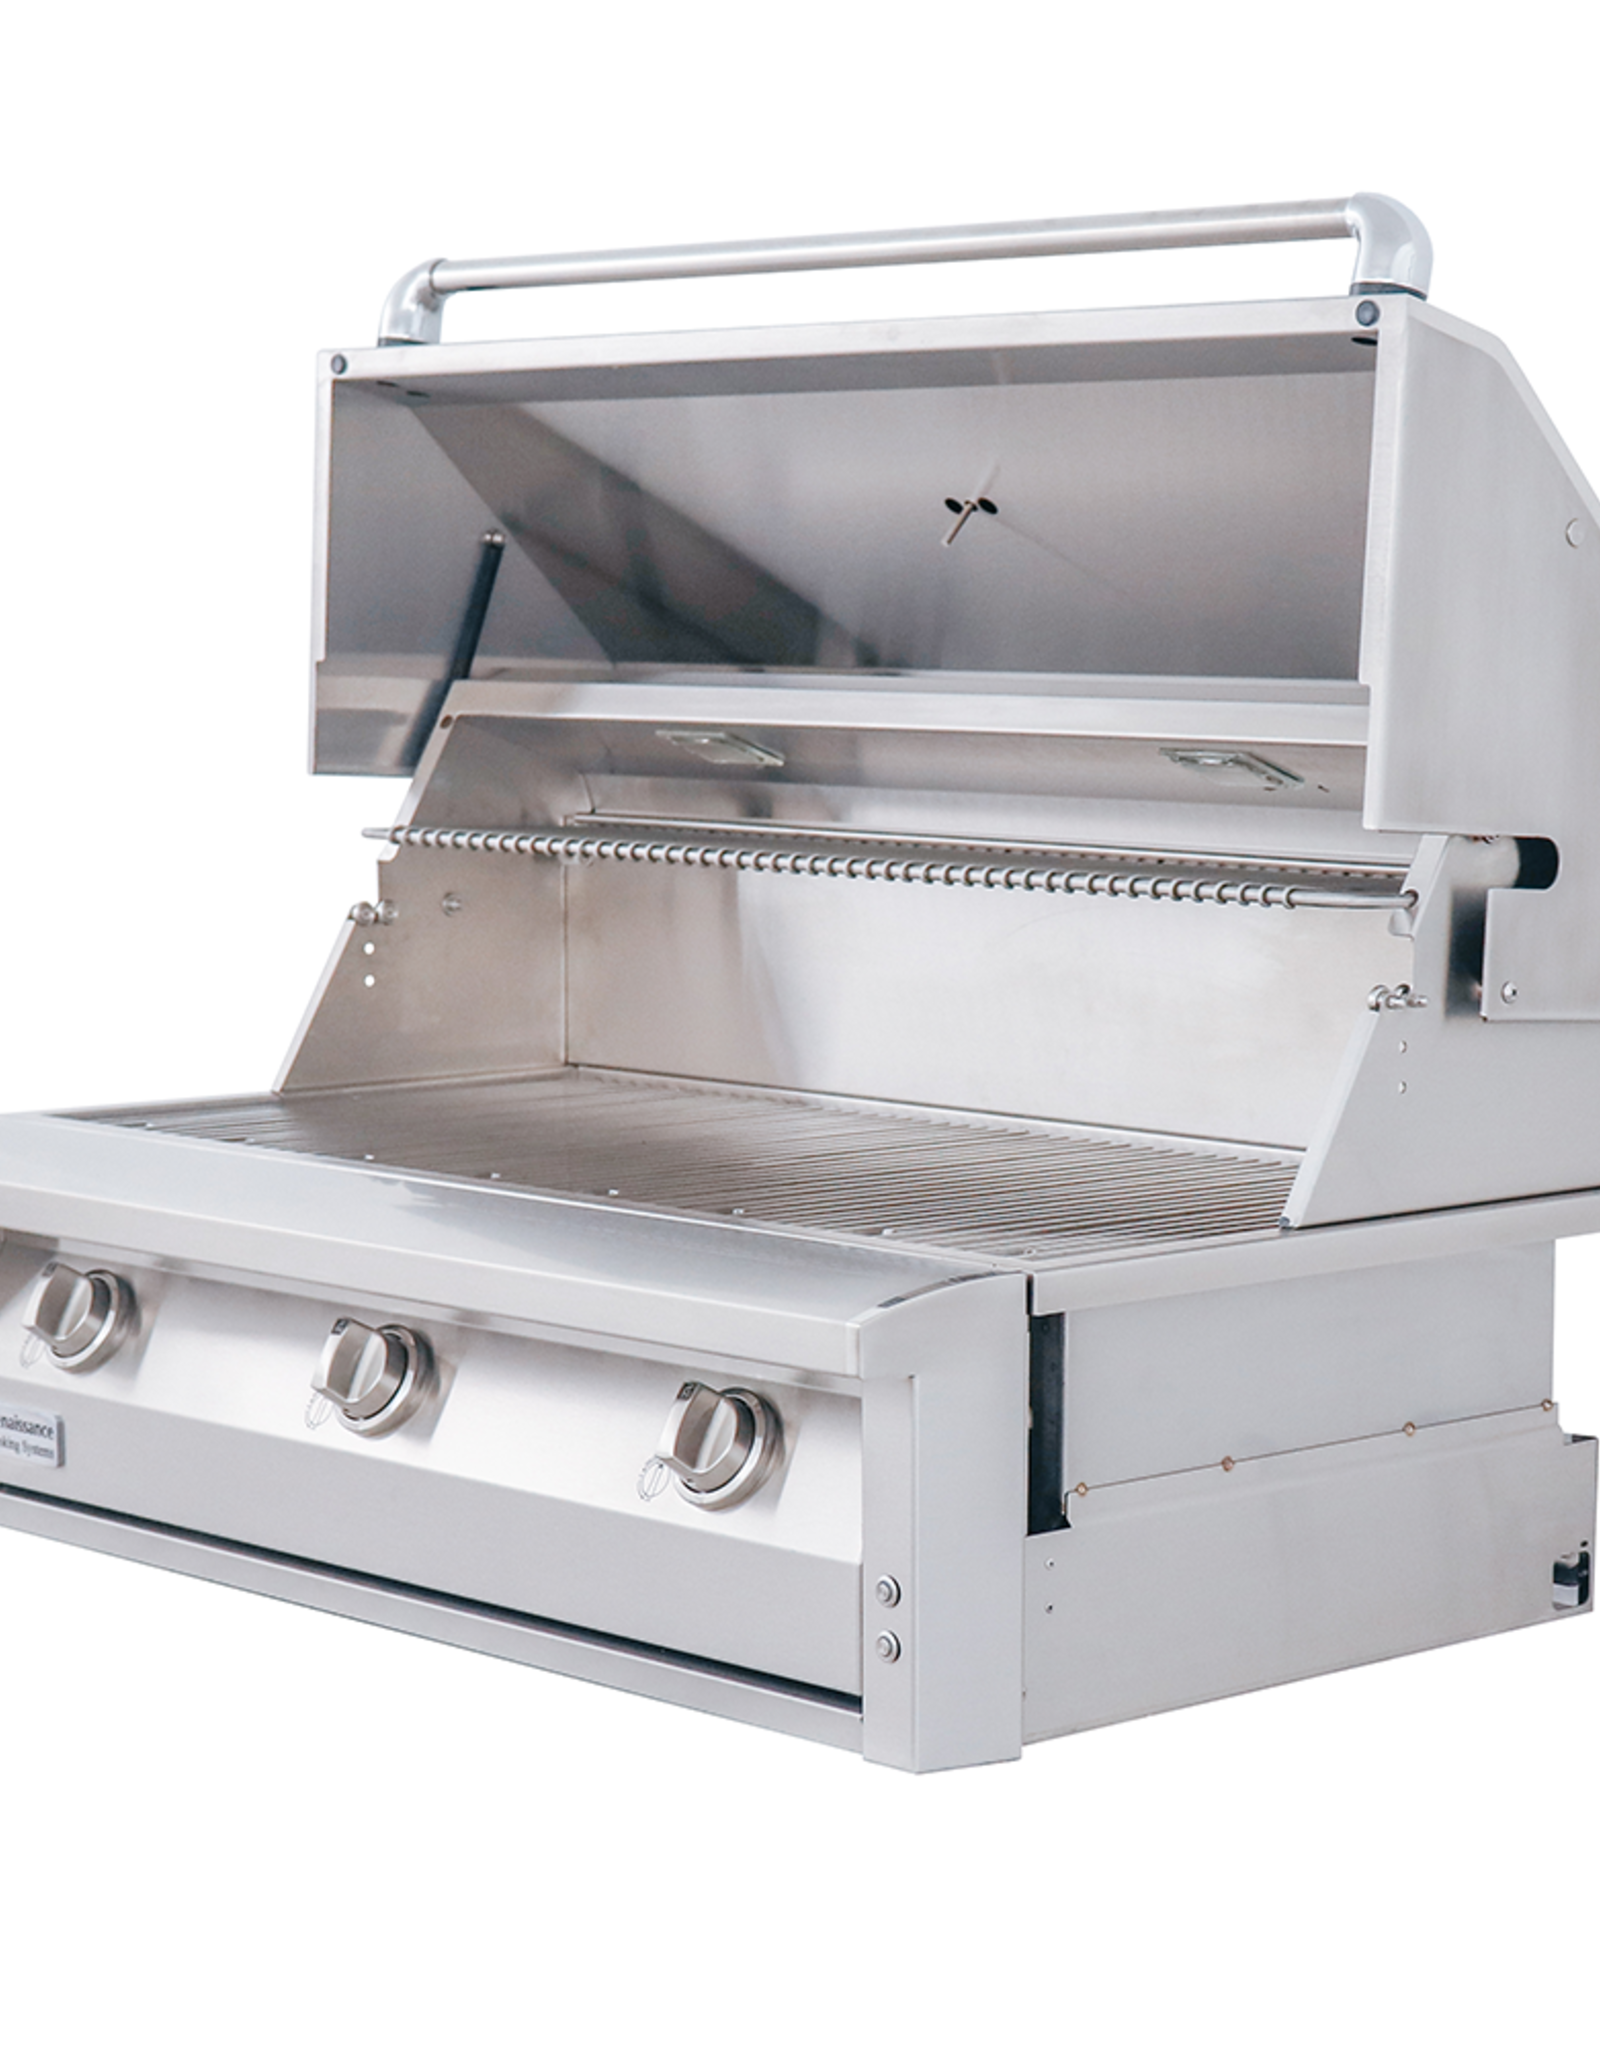 Renaissance Cooking Systems Renaissance Cooking Systems ARG 42" Drop-In Natural Gas Grill - ARG42